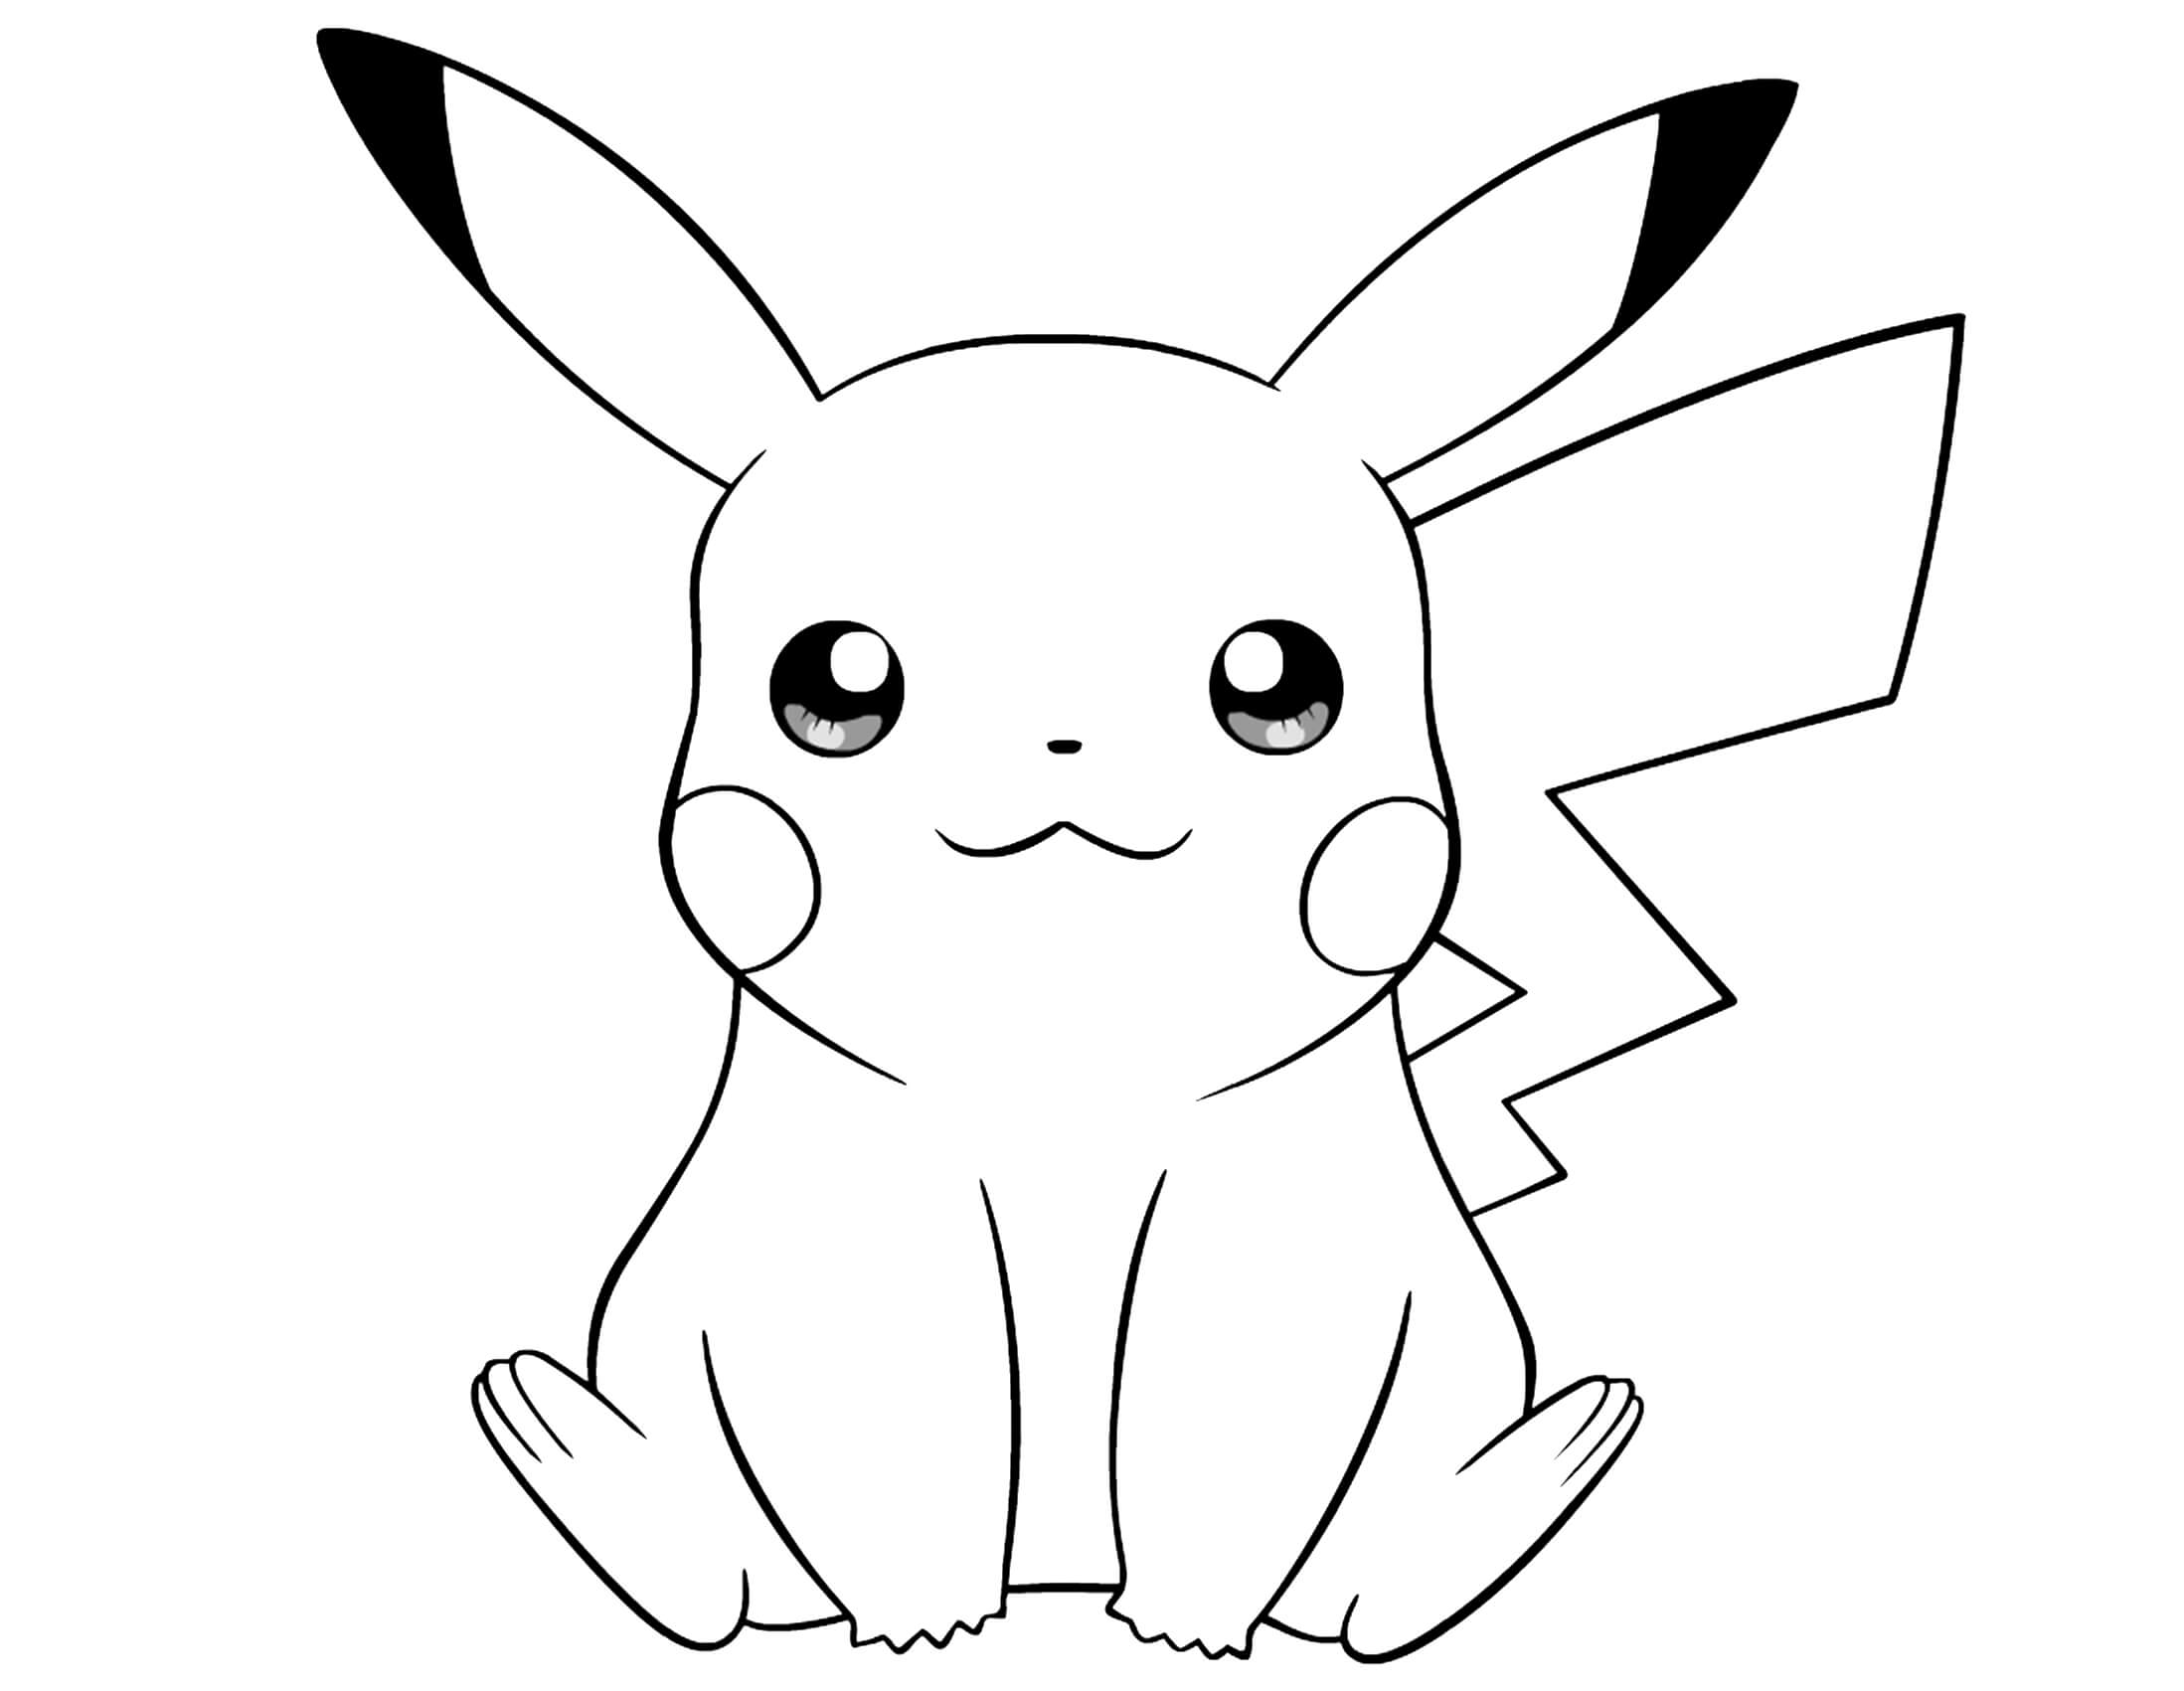 Pokemon thunderbolt attack 10 Pikachu coloring pages ...